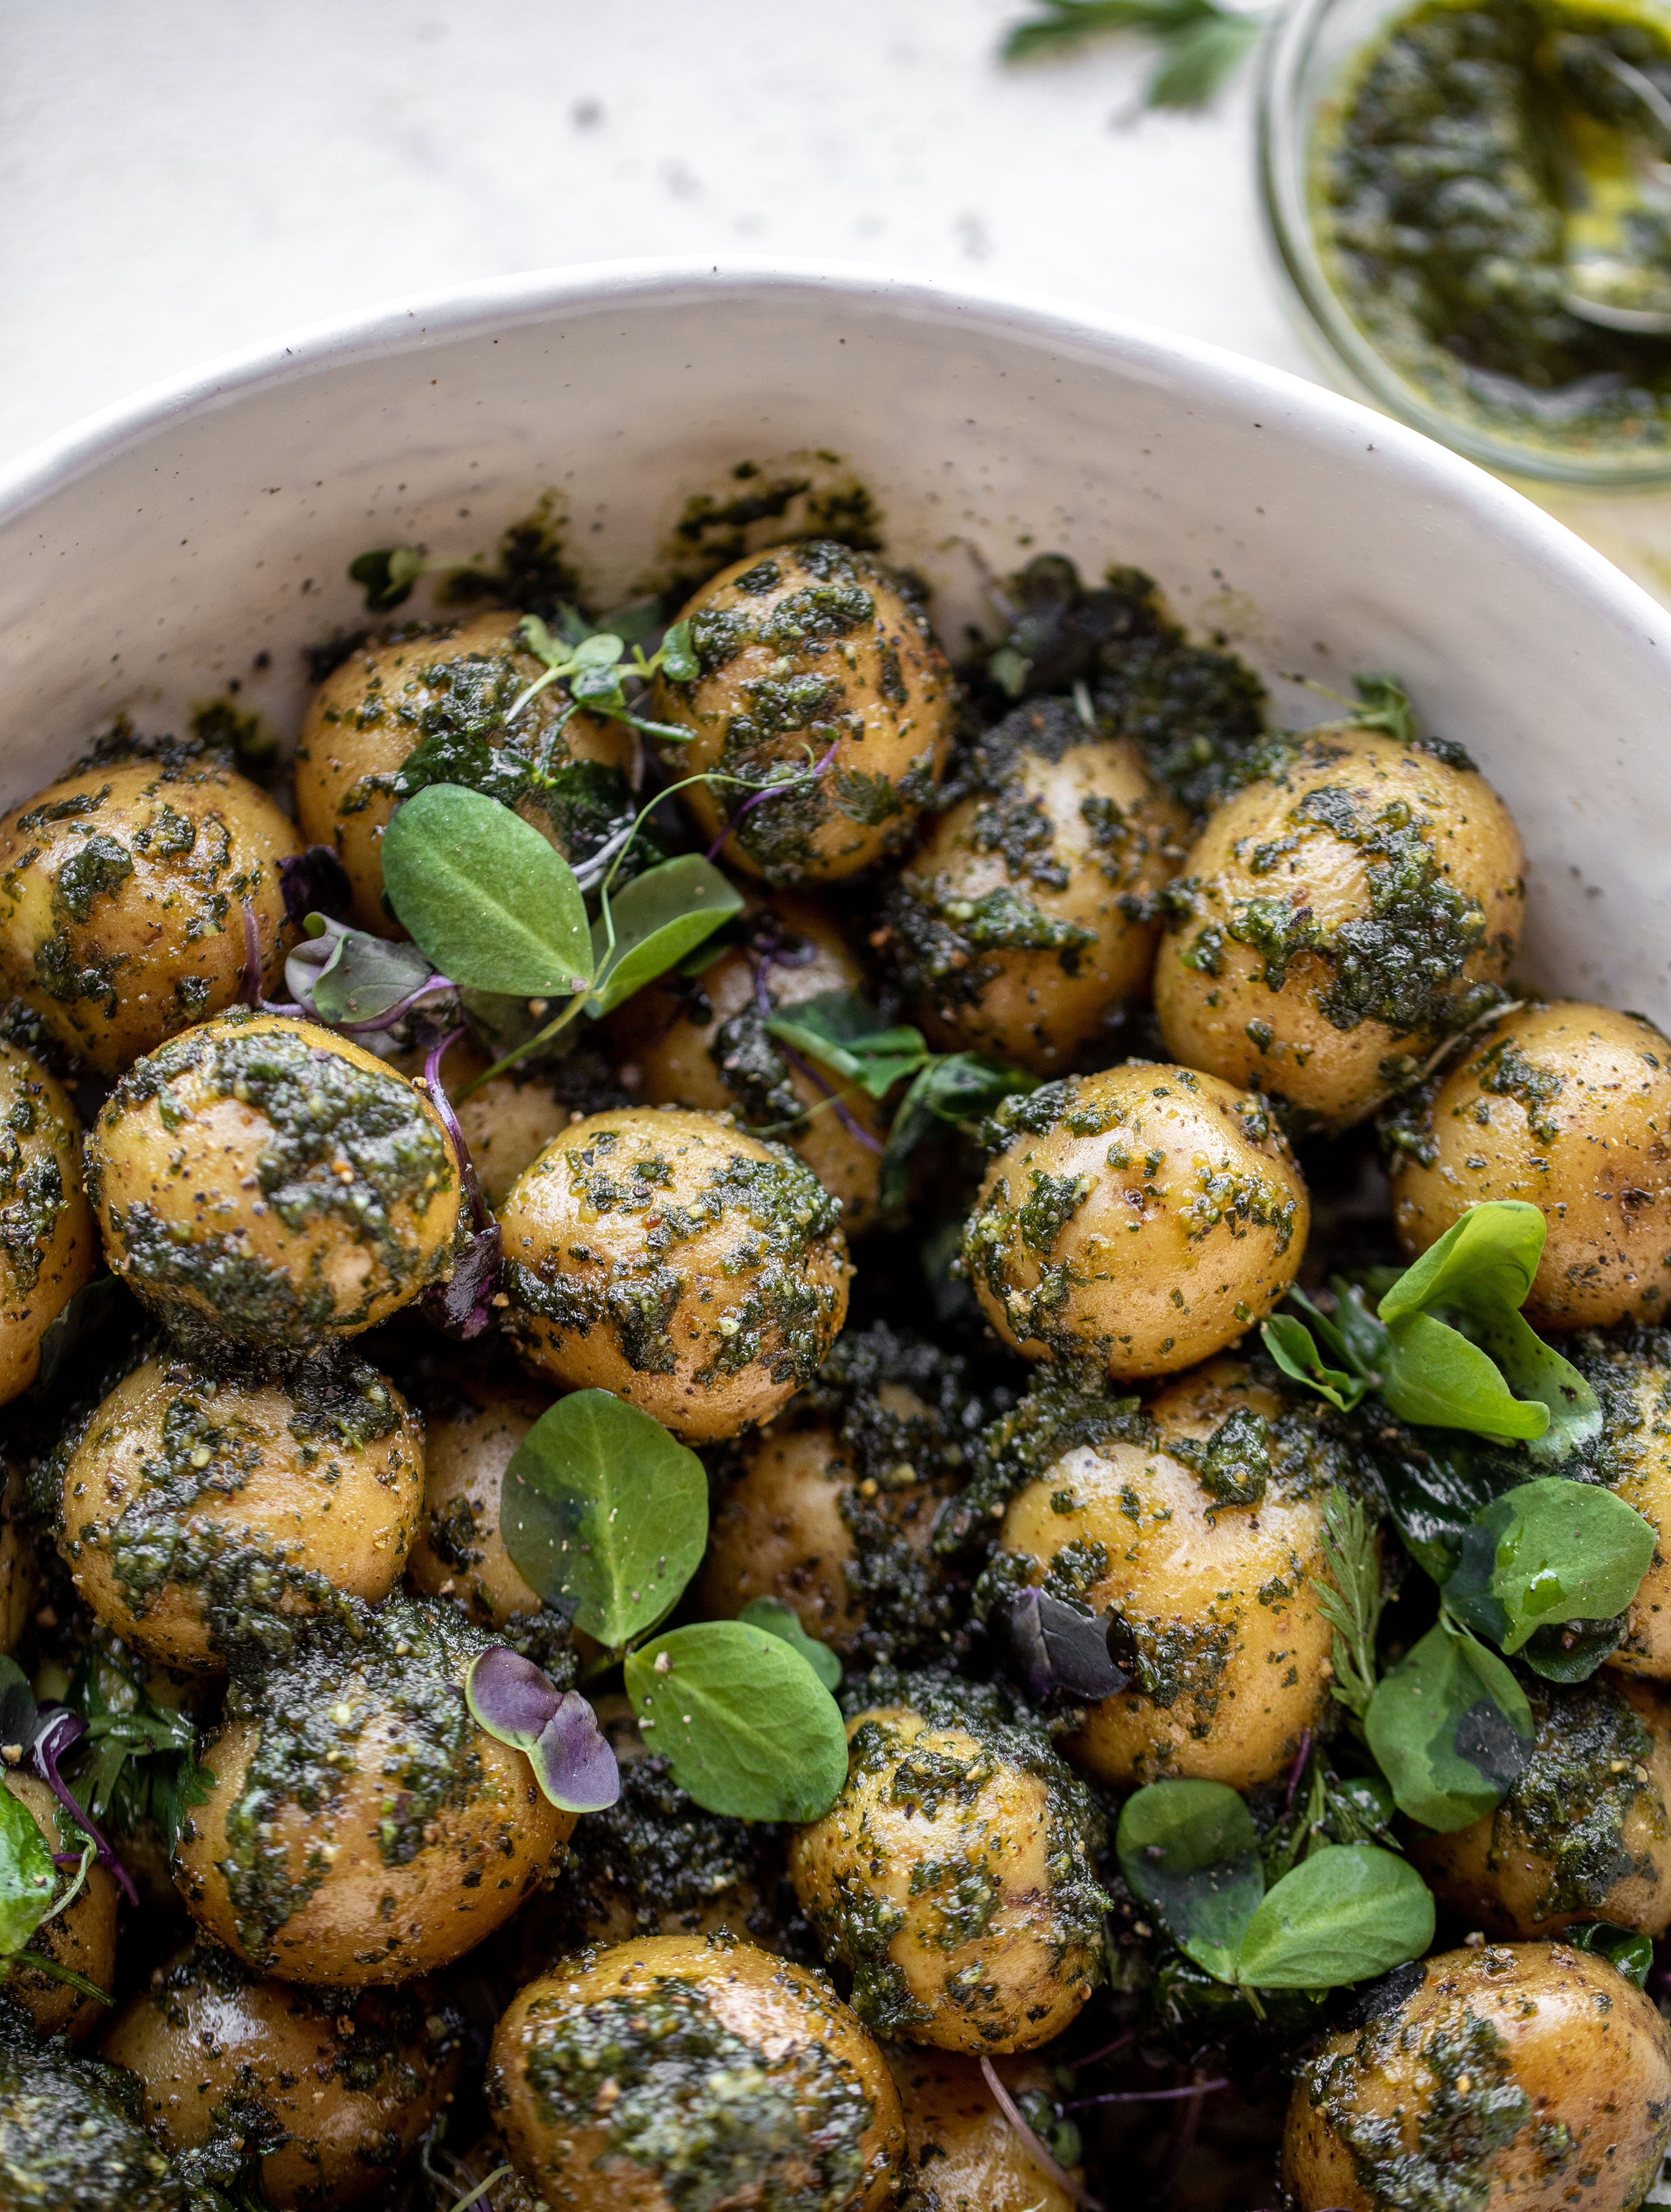 This pesto potato salad is made with carrot top pesto for the perfect spring side dish! Baby potatoes, pesto and greens make up this delish bowl.